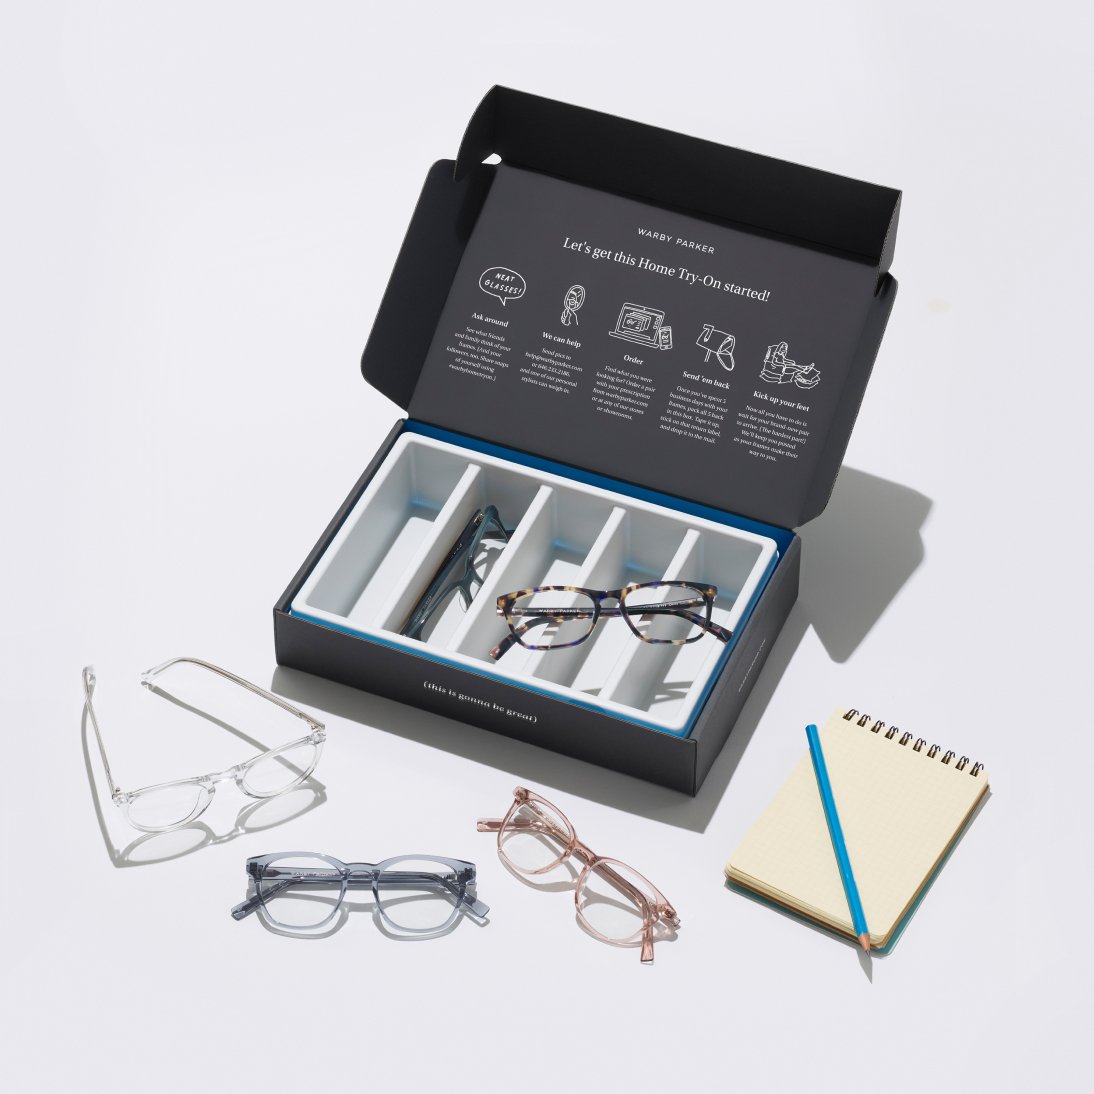 Ways To Try  Warby Parker